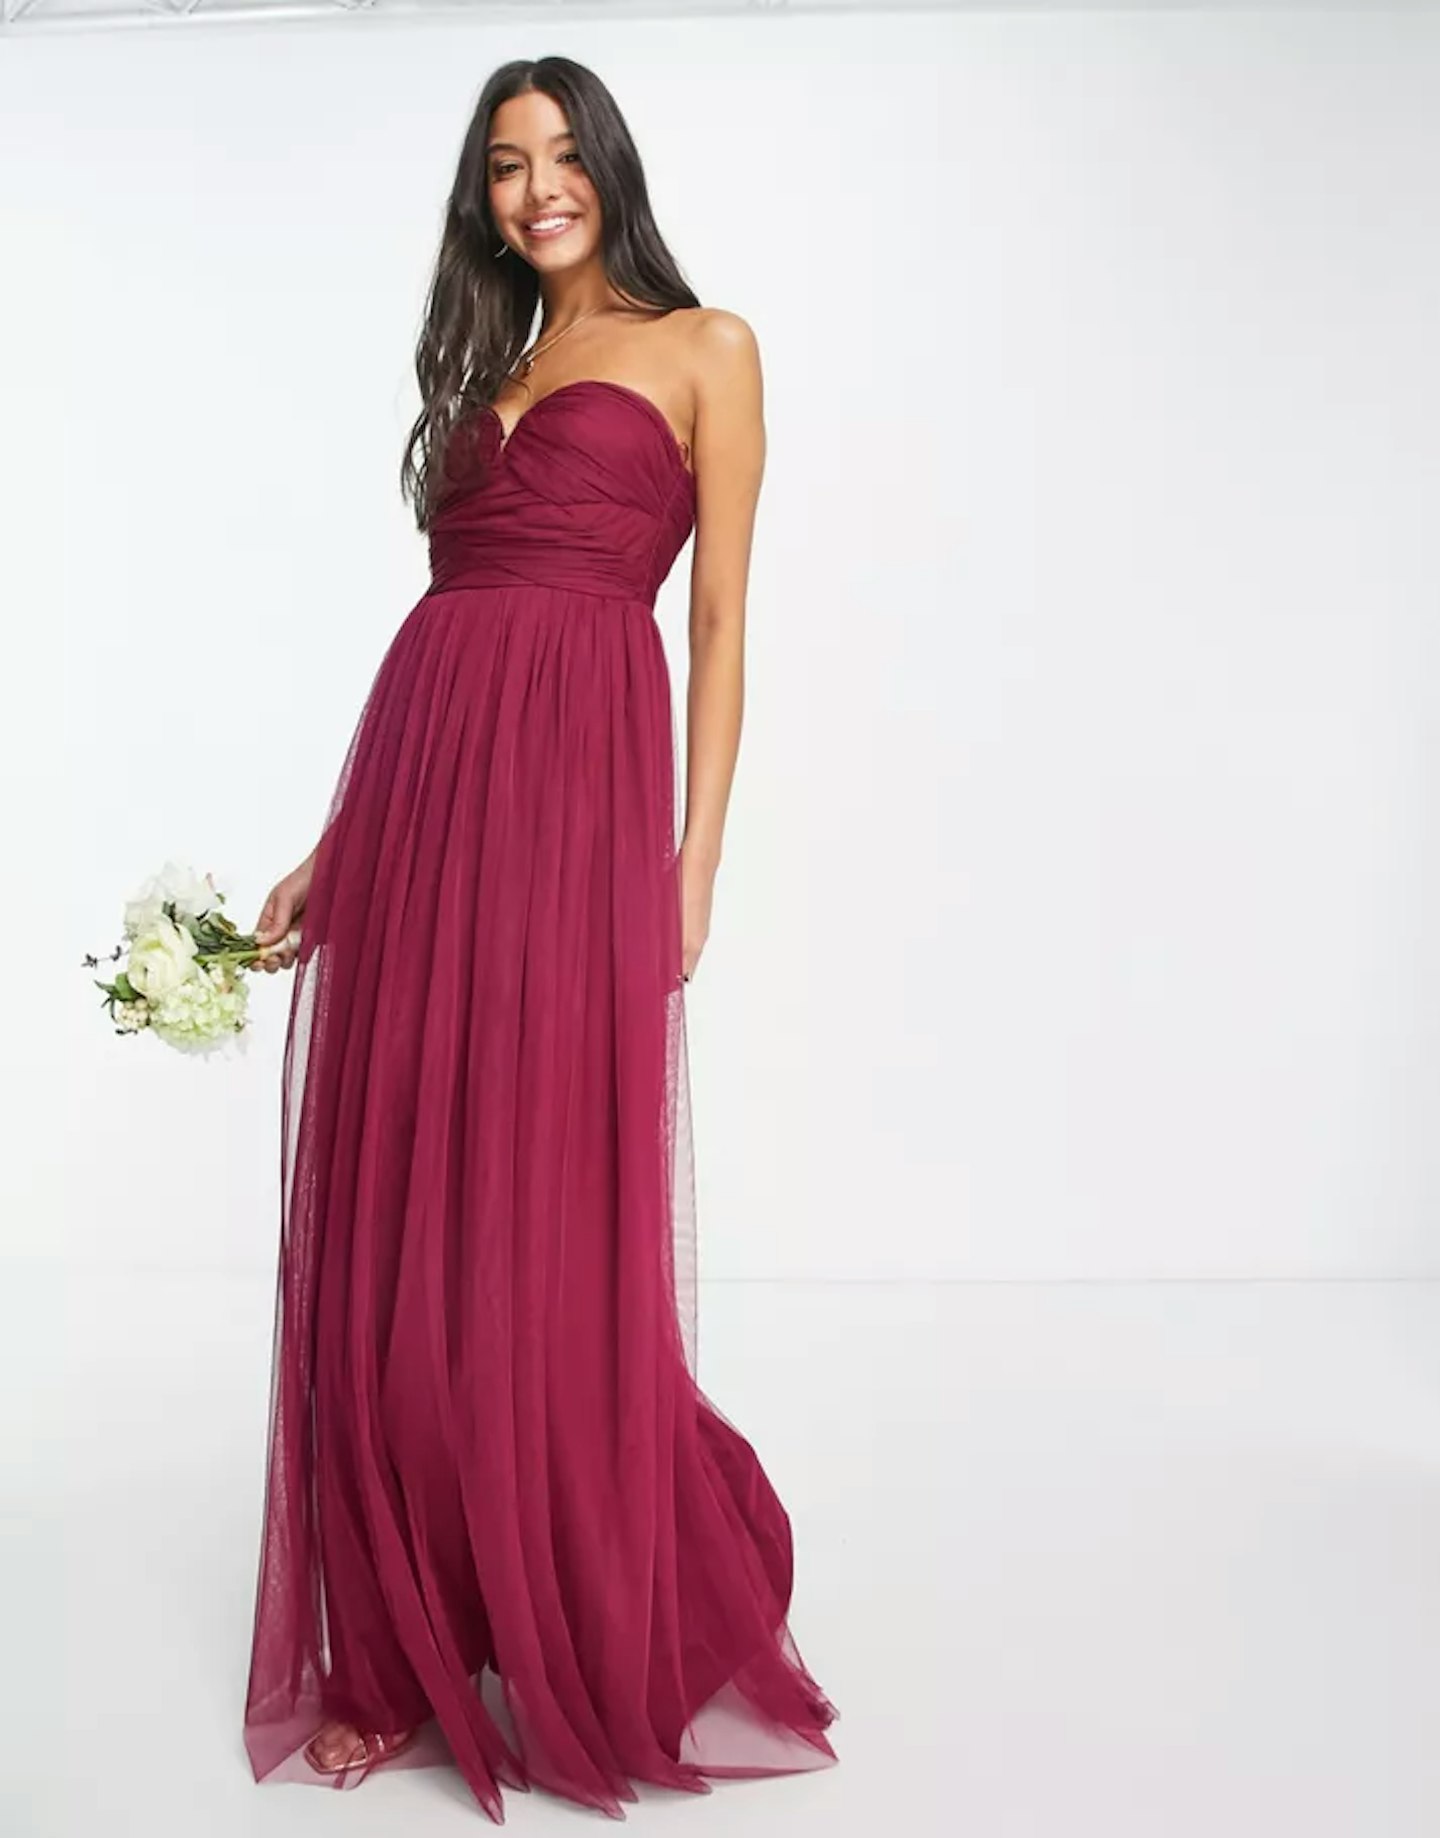 ASOS EDITION Satin Square Neck Maxi Dress with Side Split in Wine